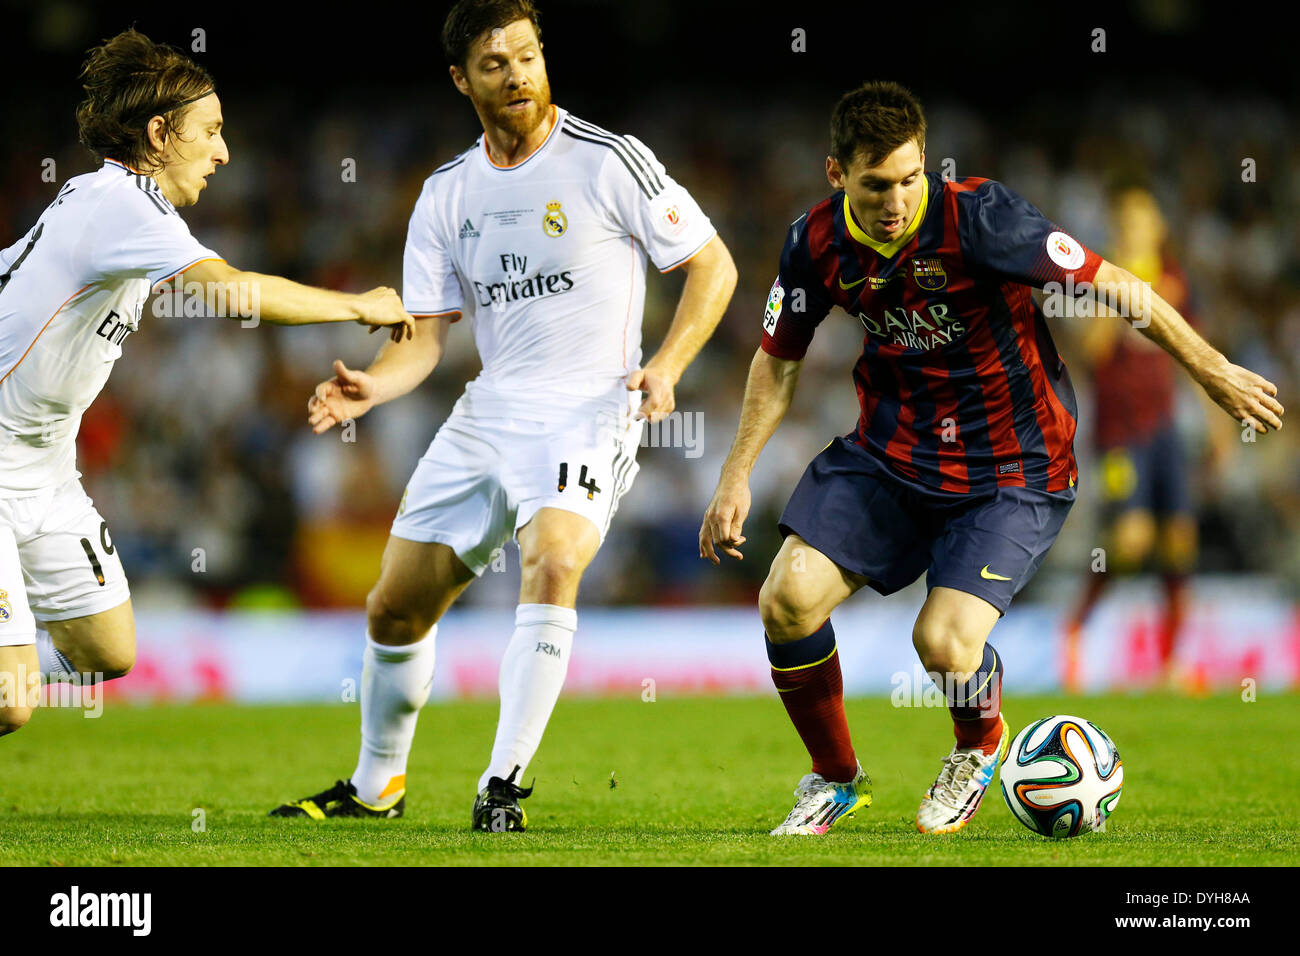 Valencia, Spain. © D. 16th Apr, 2014. Luka Modric, Xabi Alonso (Real), Lionel Messi (Barcelona) Football/Soccer : Copa del Rey final match between FC Barcelona 1-2 Real Madrid at Mestalla stadium in Valencia, Spain. Credit:  D .Nakashima/AFLO/Alamy Live News Stock Photo